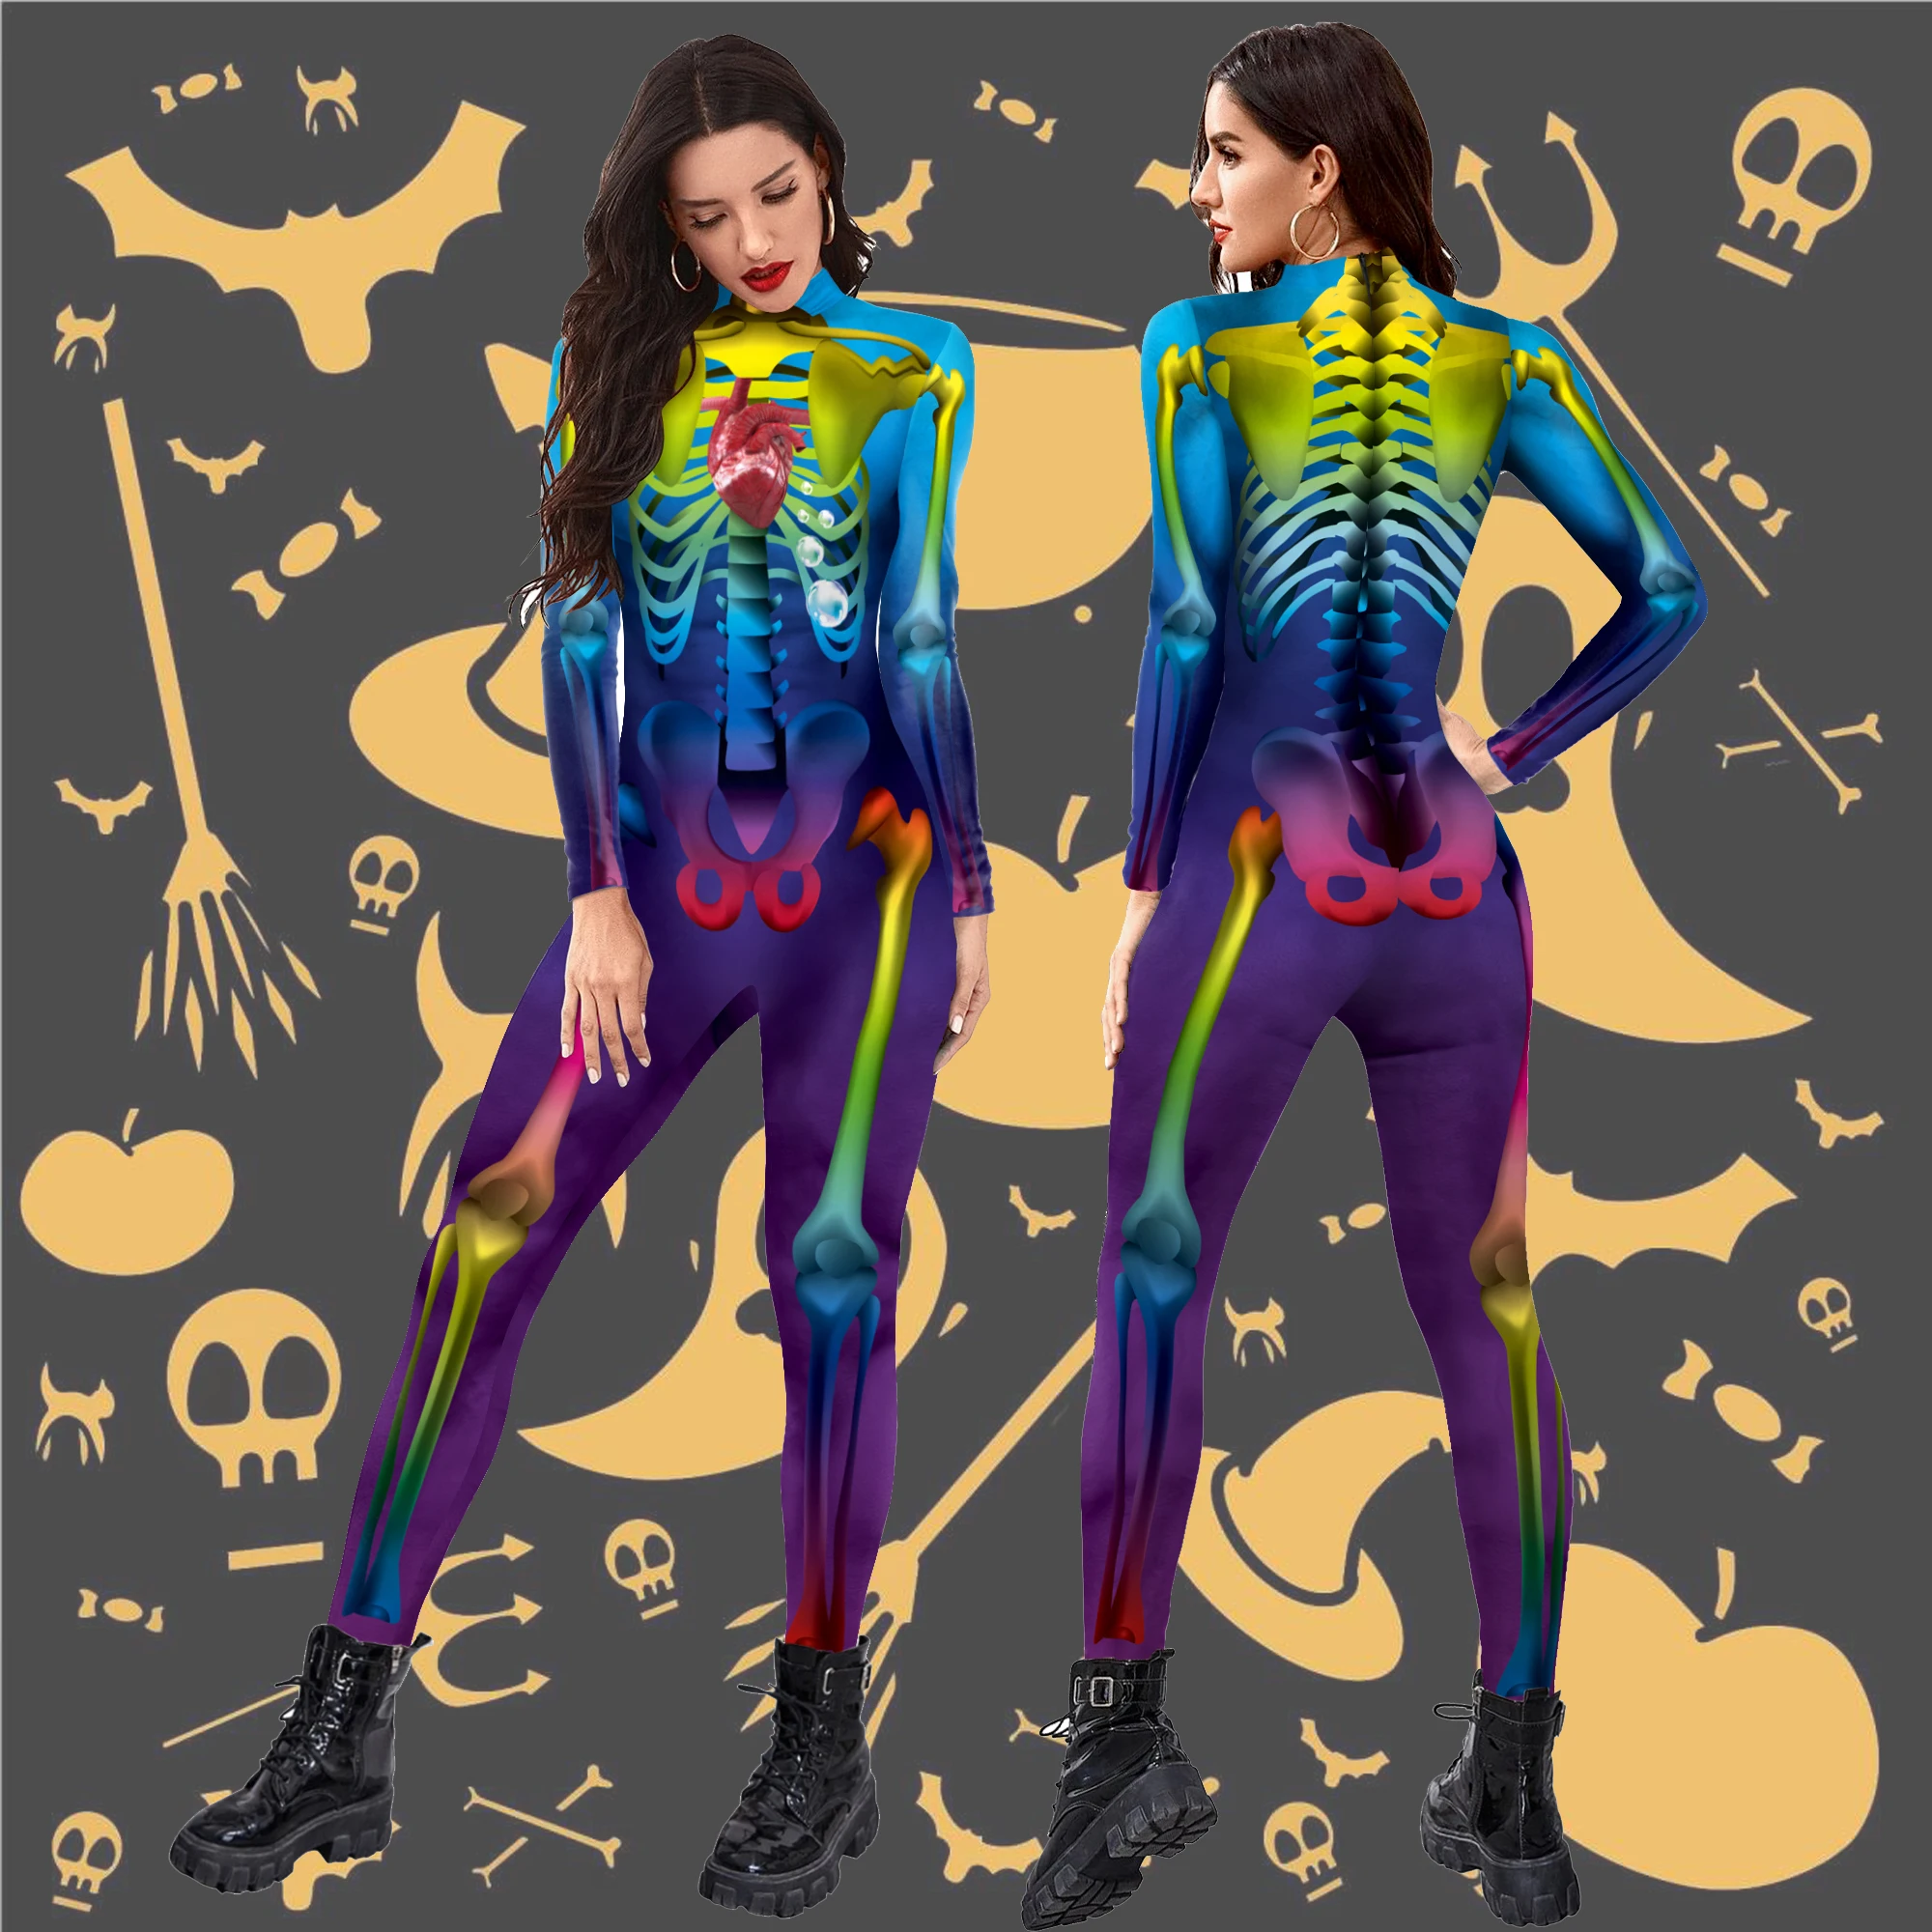 

Zawaland Scary Skeleton Printed Bodysuit Halloween Party Cosplay Costume for Adult Jumpsuit Zentai Catsuit Carnival Clothing